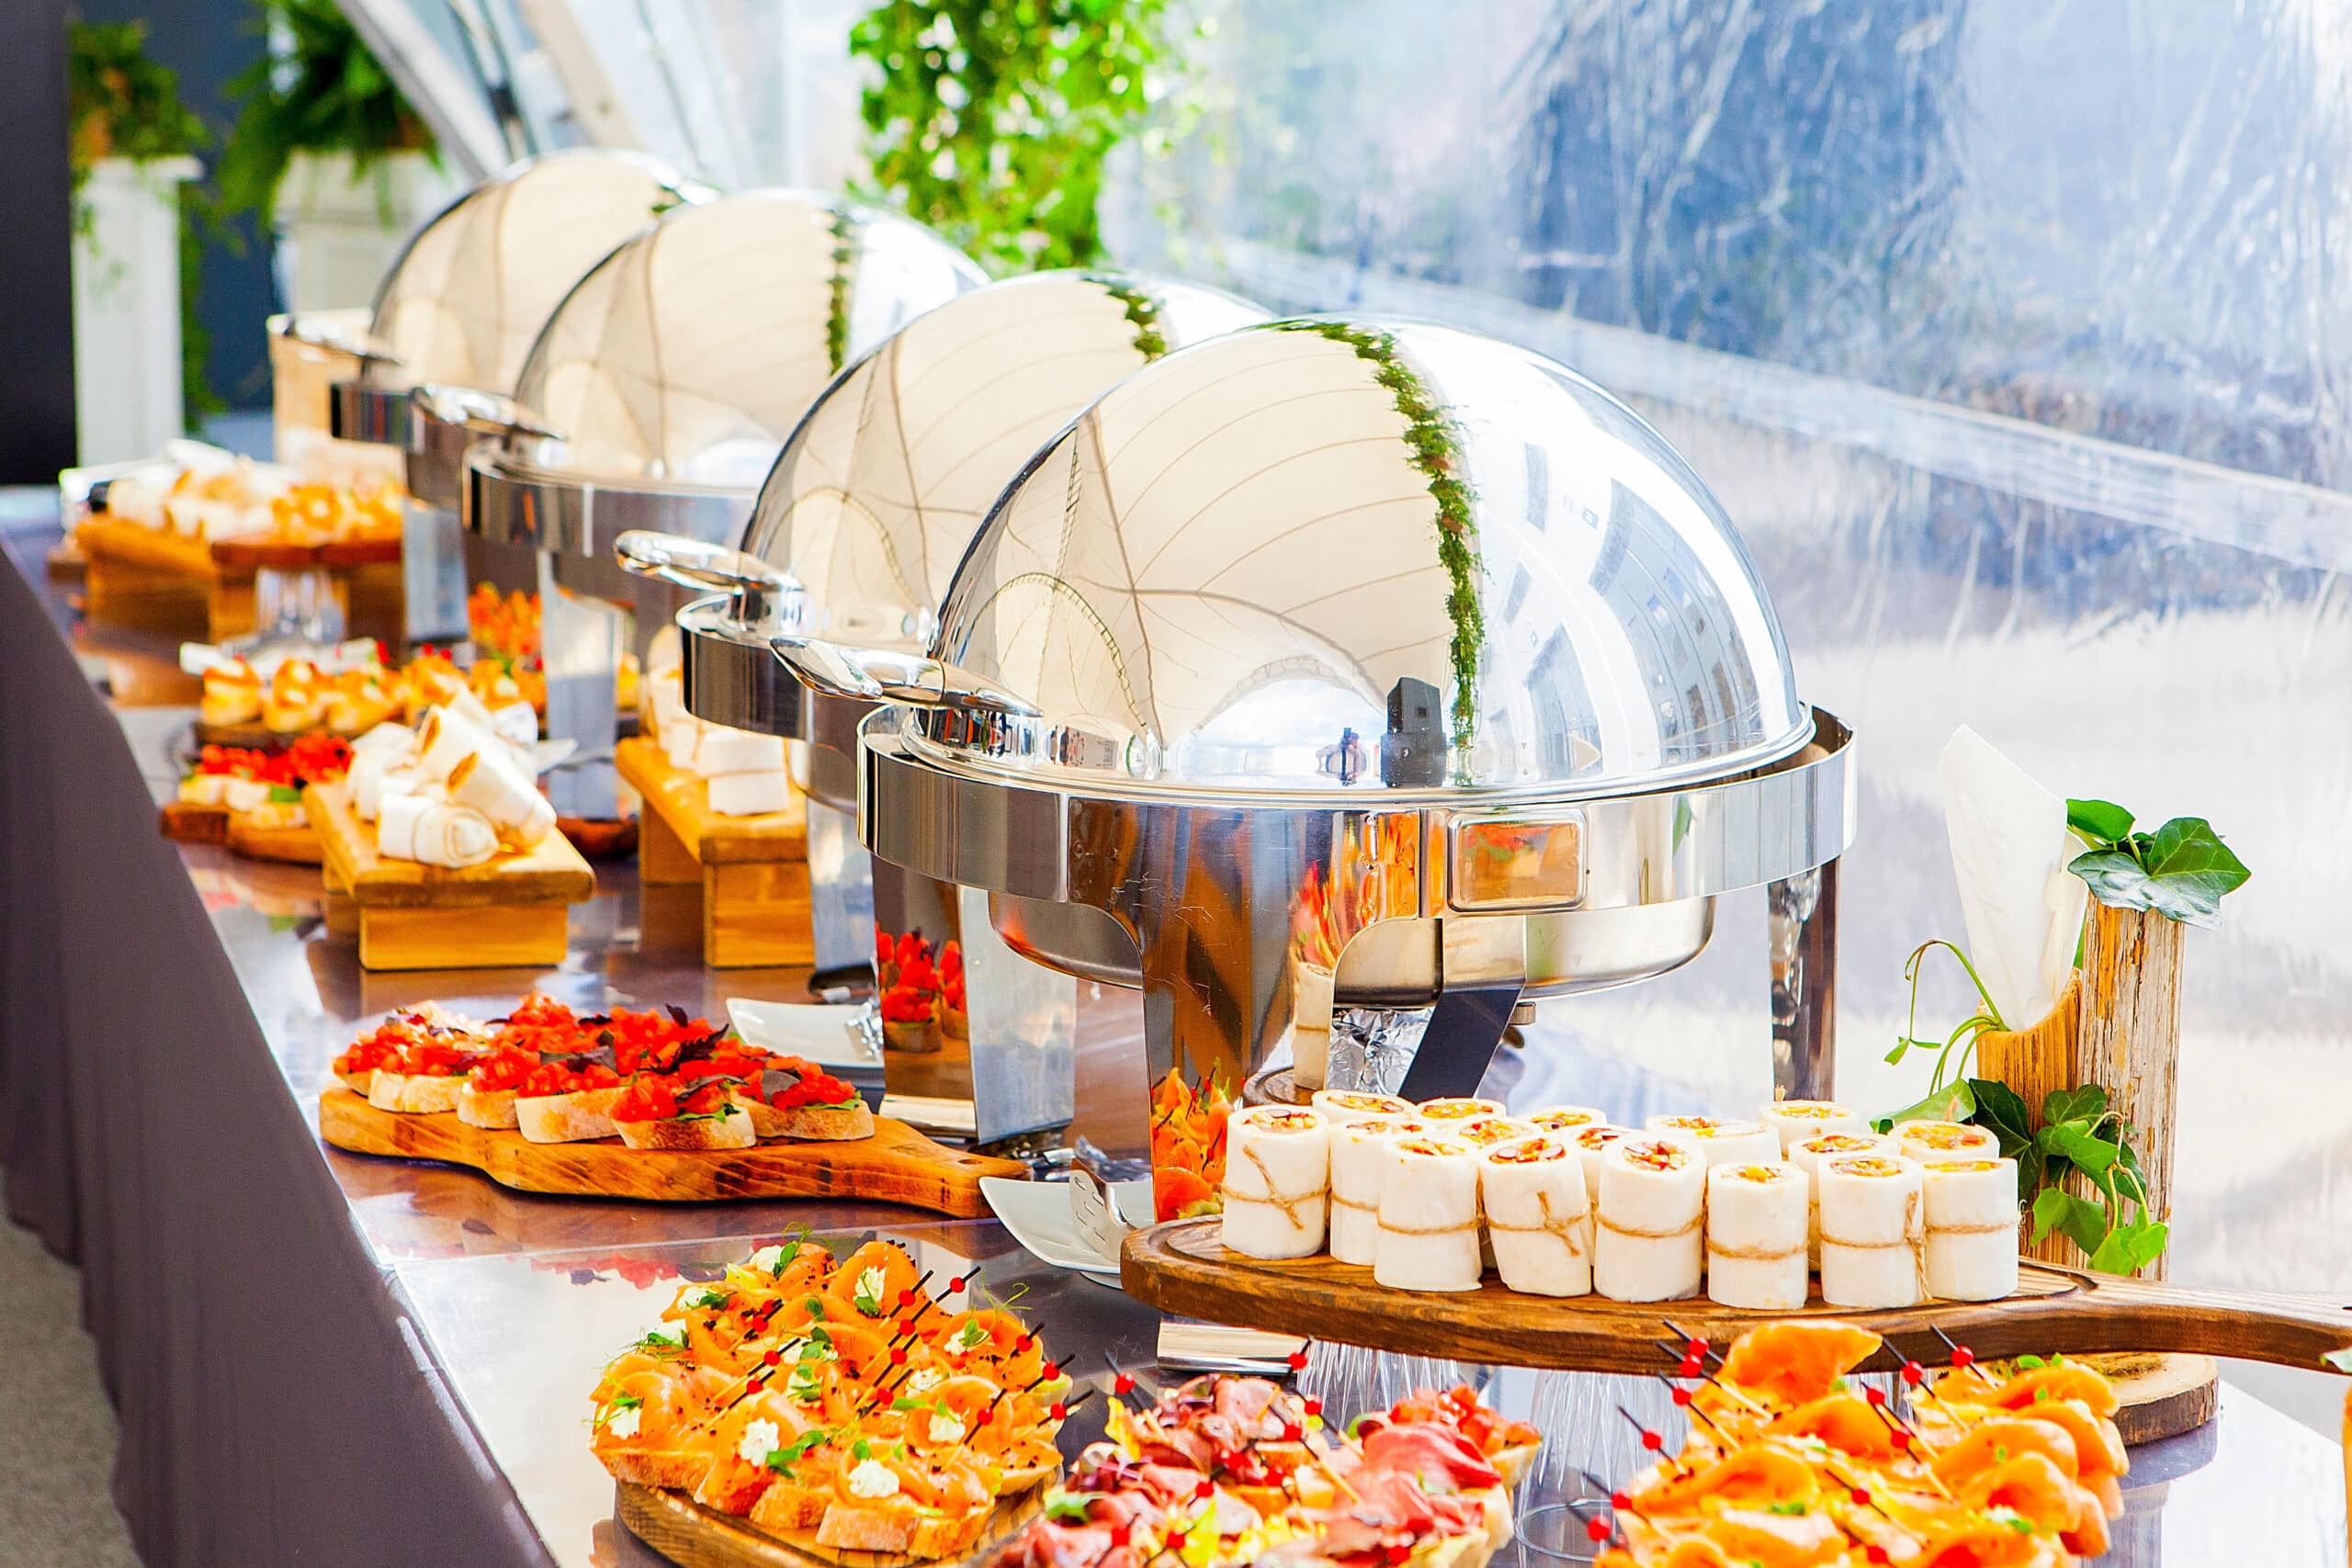 Corporate event buffet setup by Everyone Eats Catering